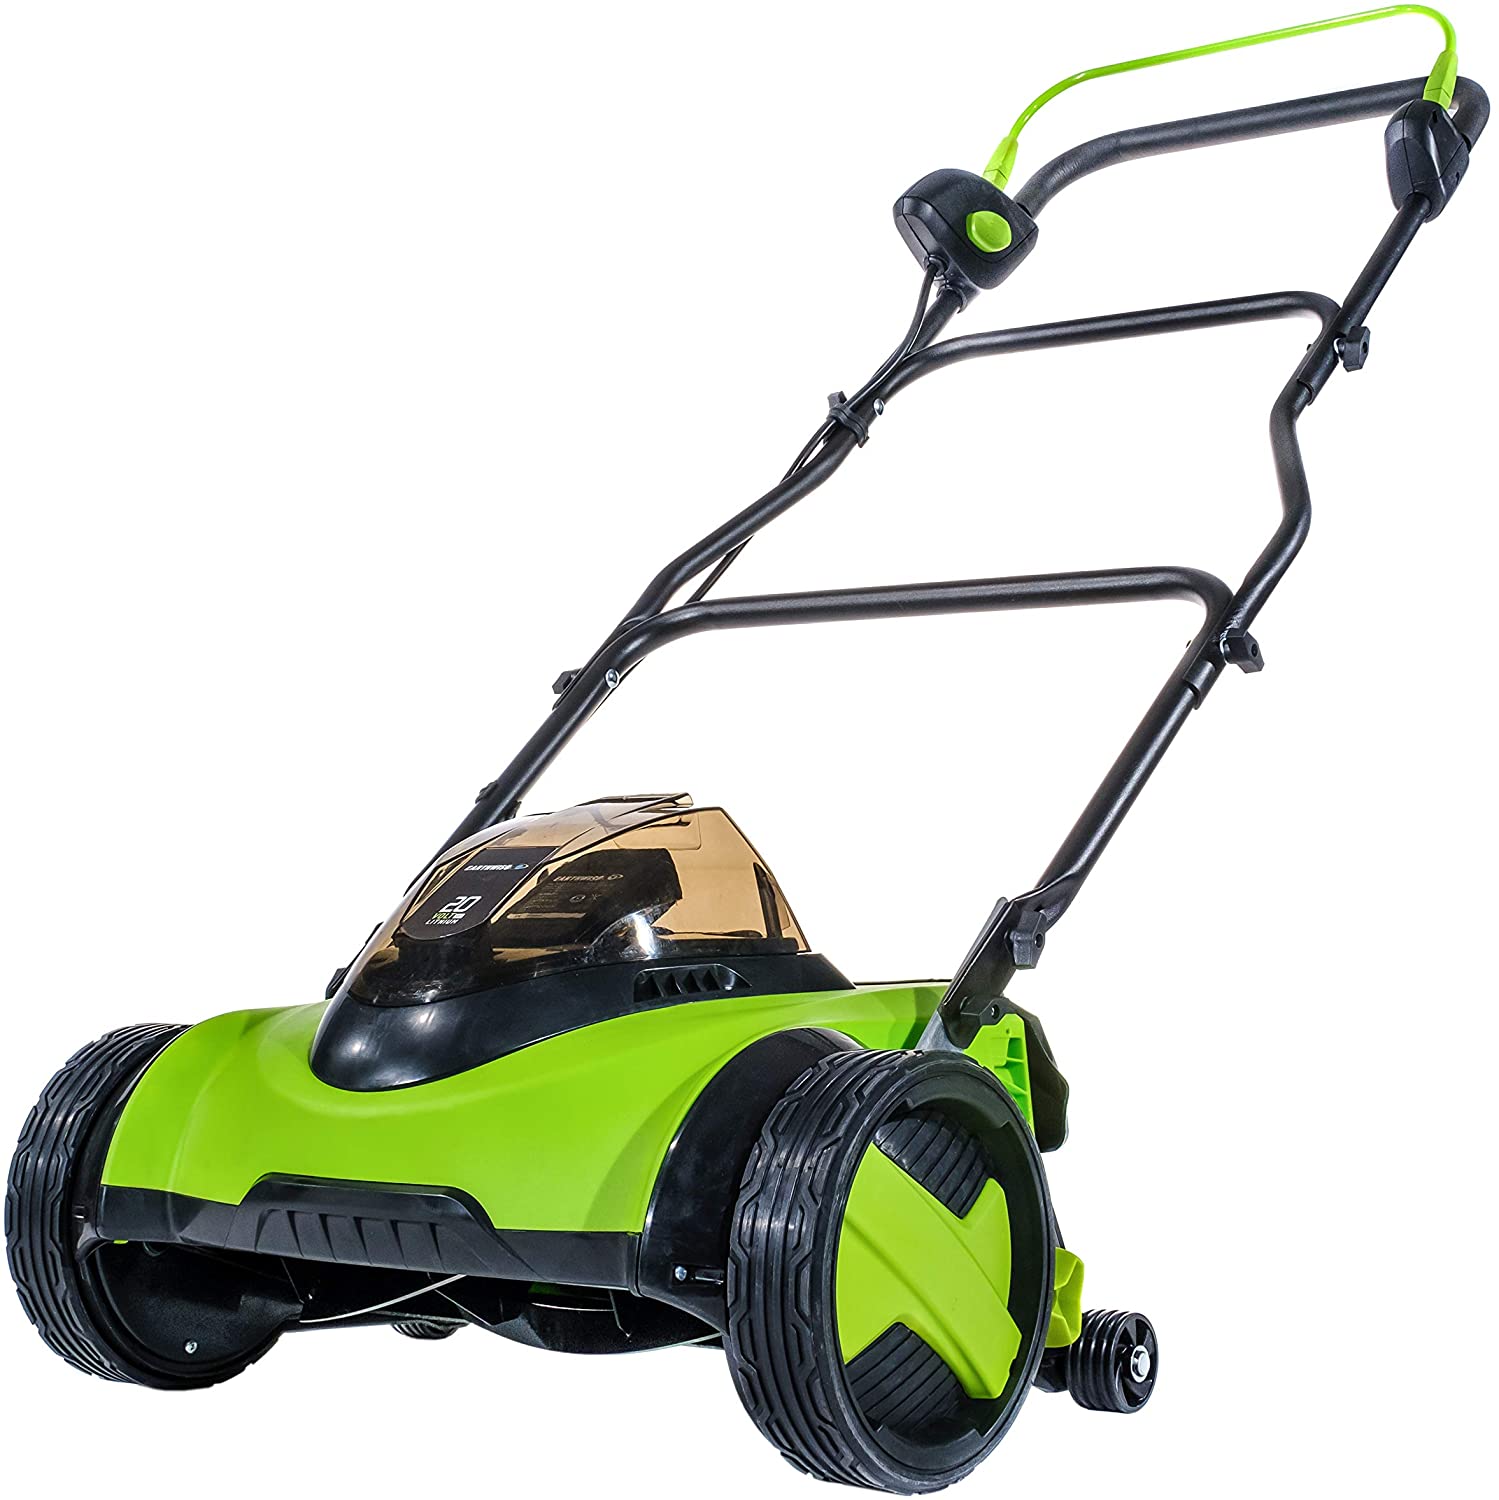 Earthwise Push Lawn Mowers at